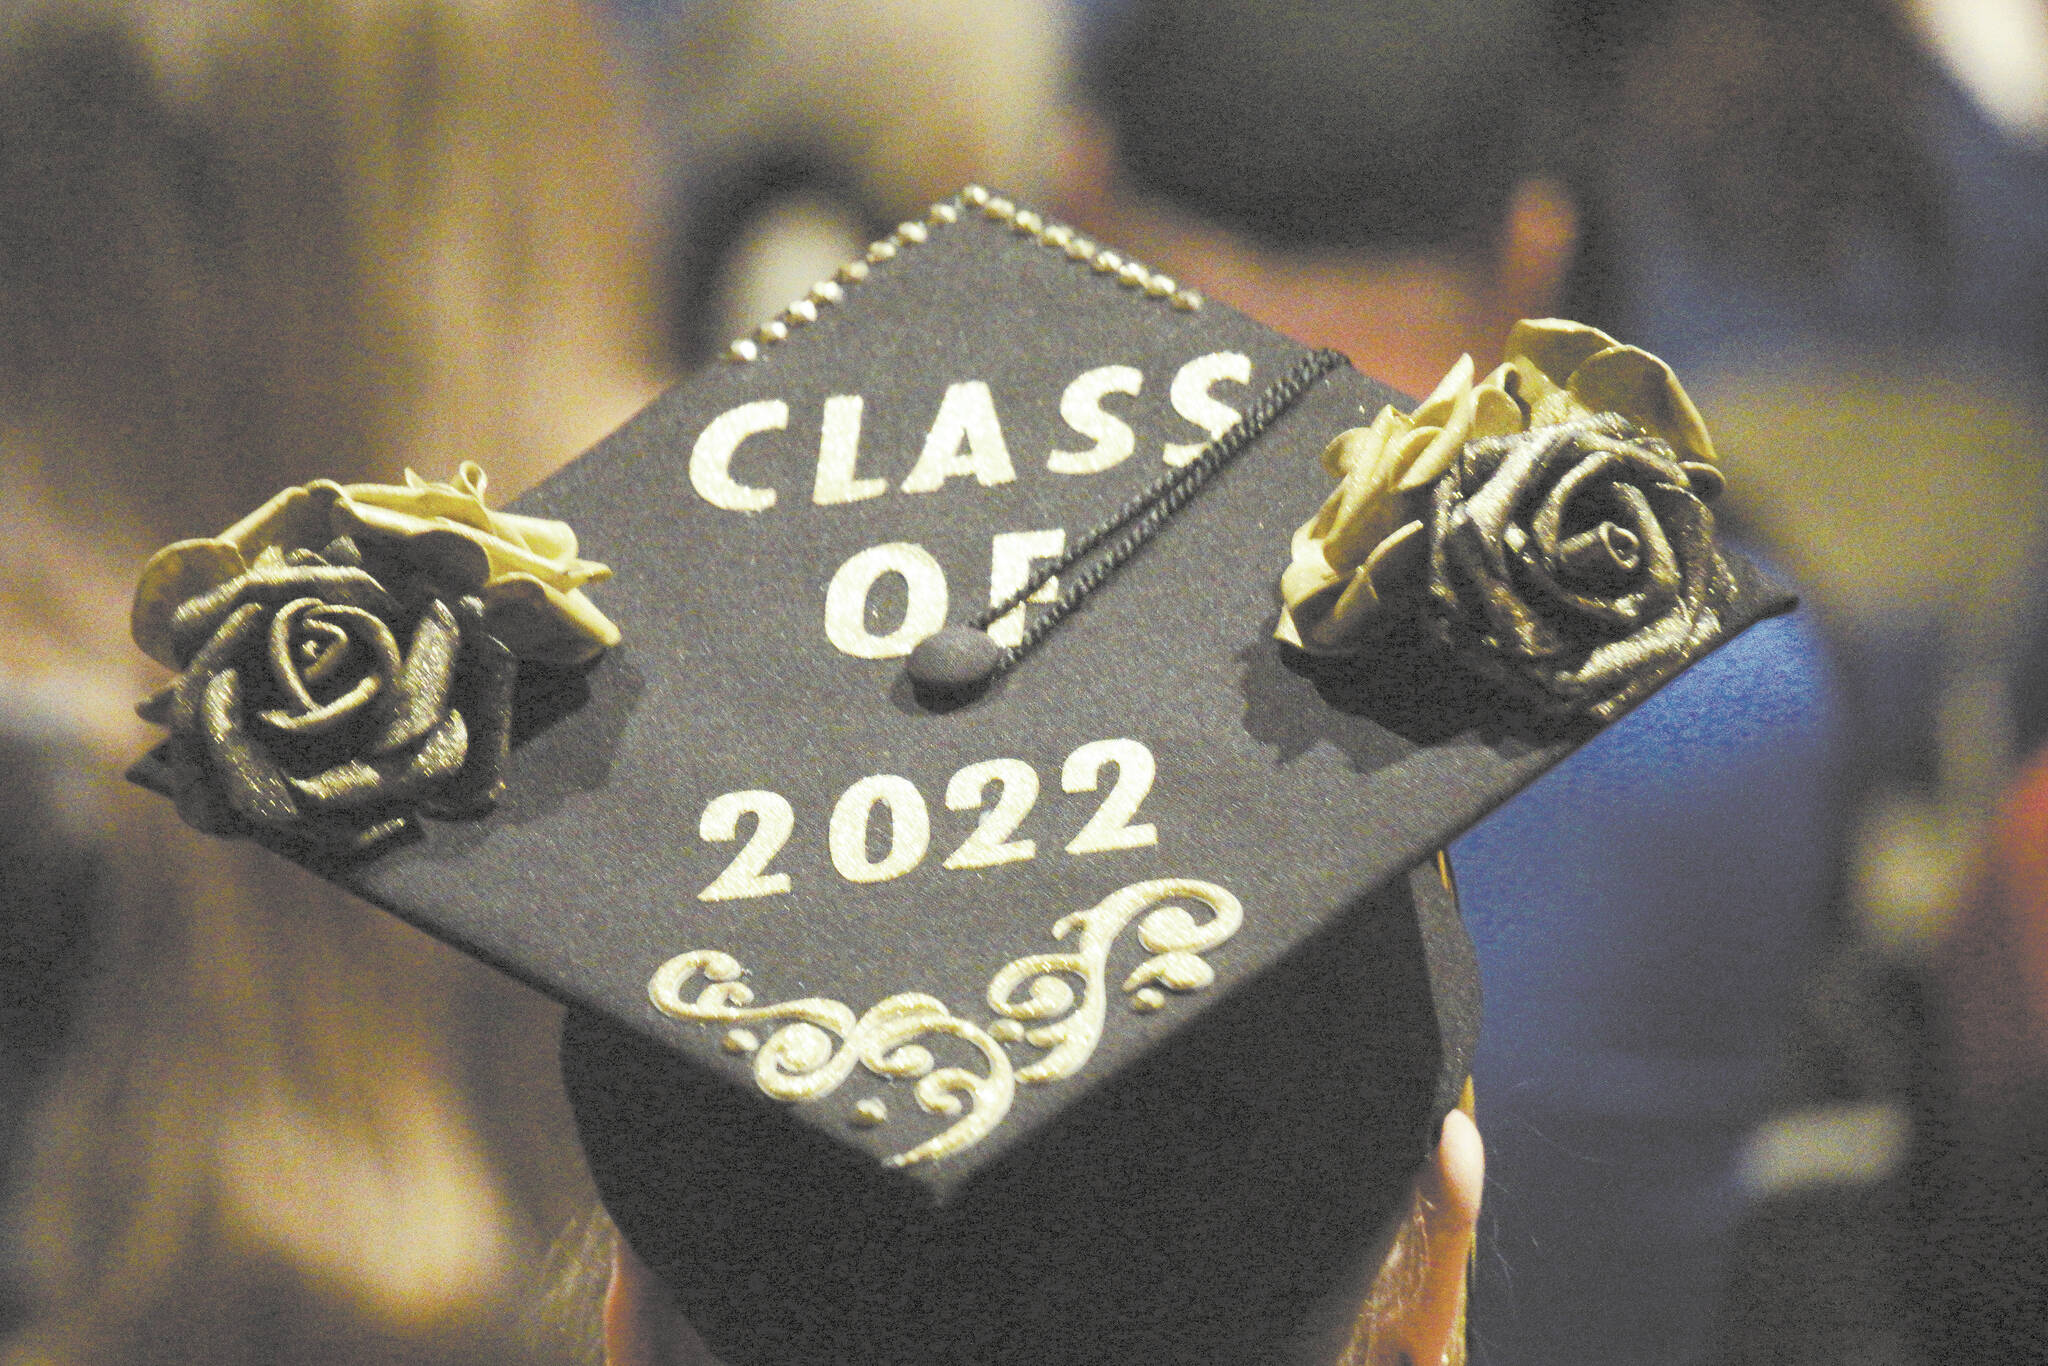 Photo by Michael Armstrong/Homer News 
A graduating senior decorated her hat for graduation on Wednesday, May 18 at Homer High School.